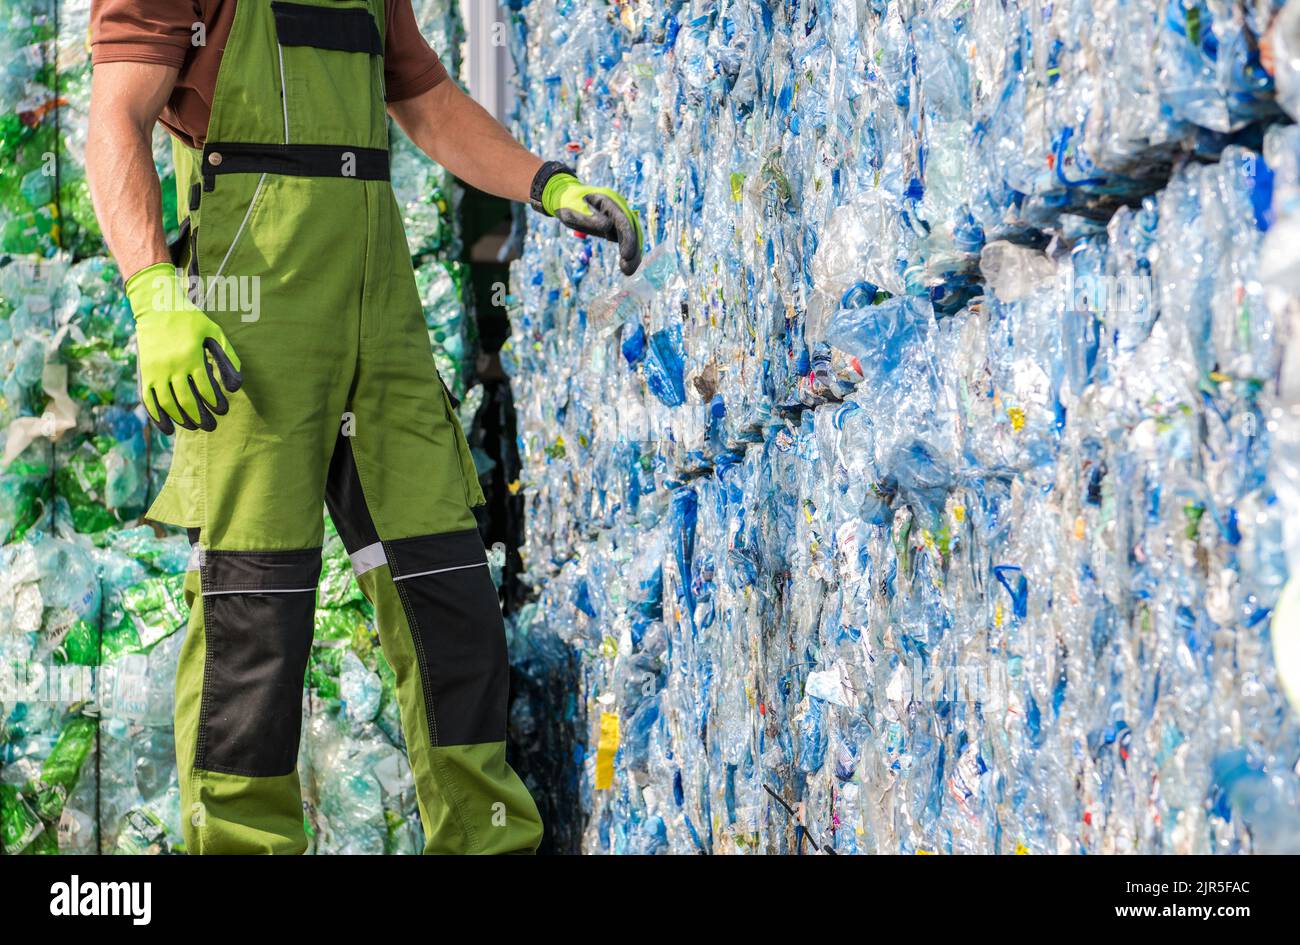 Caucasian Waste Management Worker in Front of a Pile of Pressed Plastic PET Bottles. Trash Sorting Facility. Stock Photo